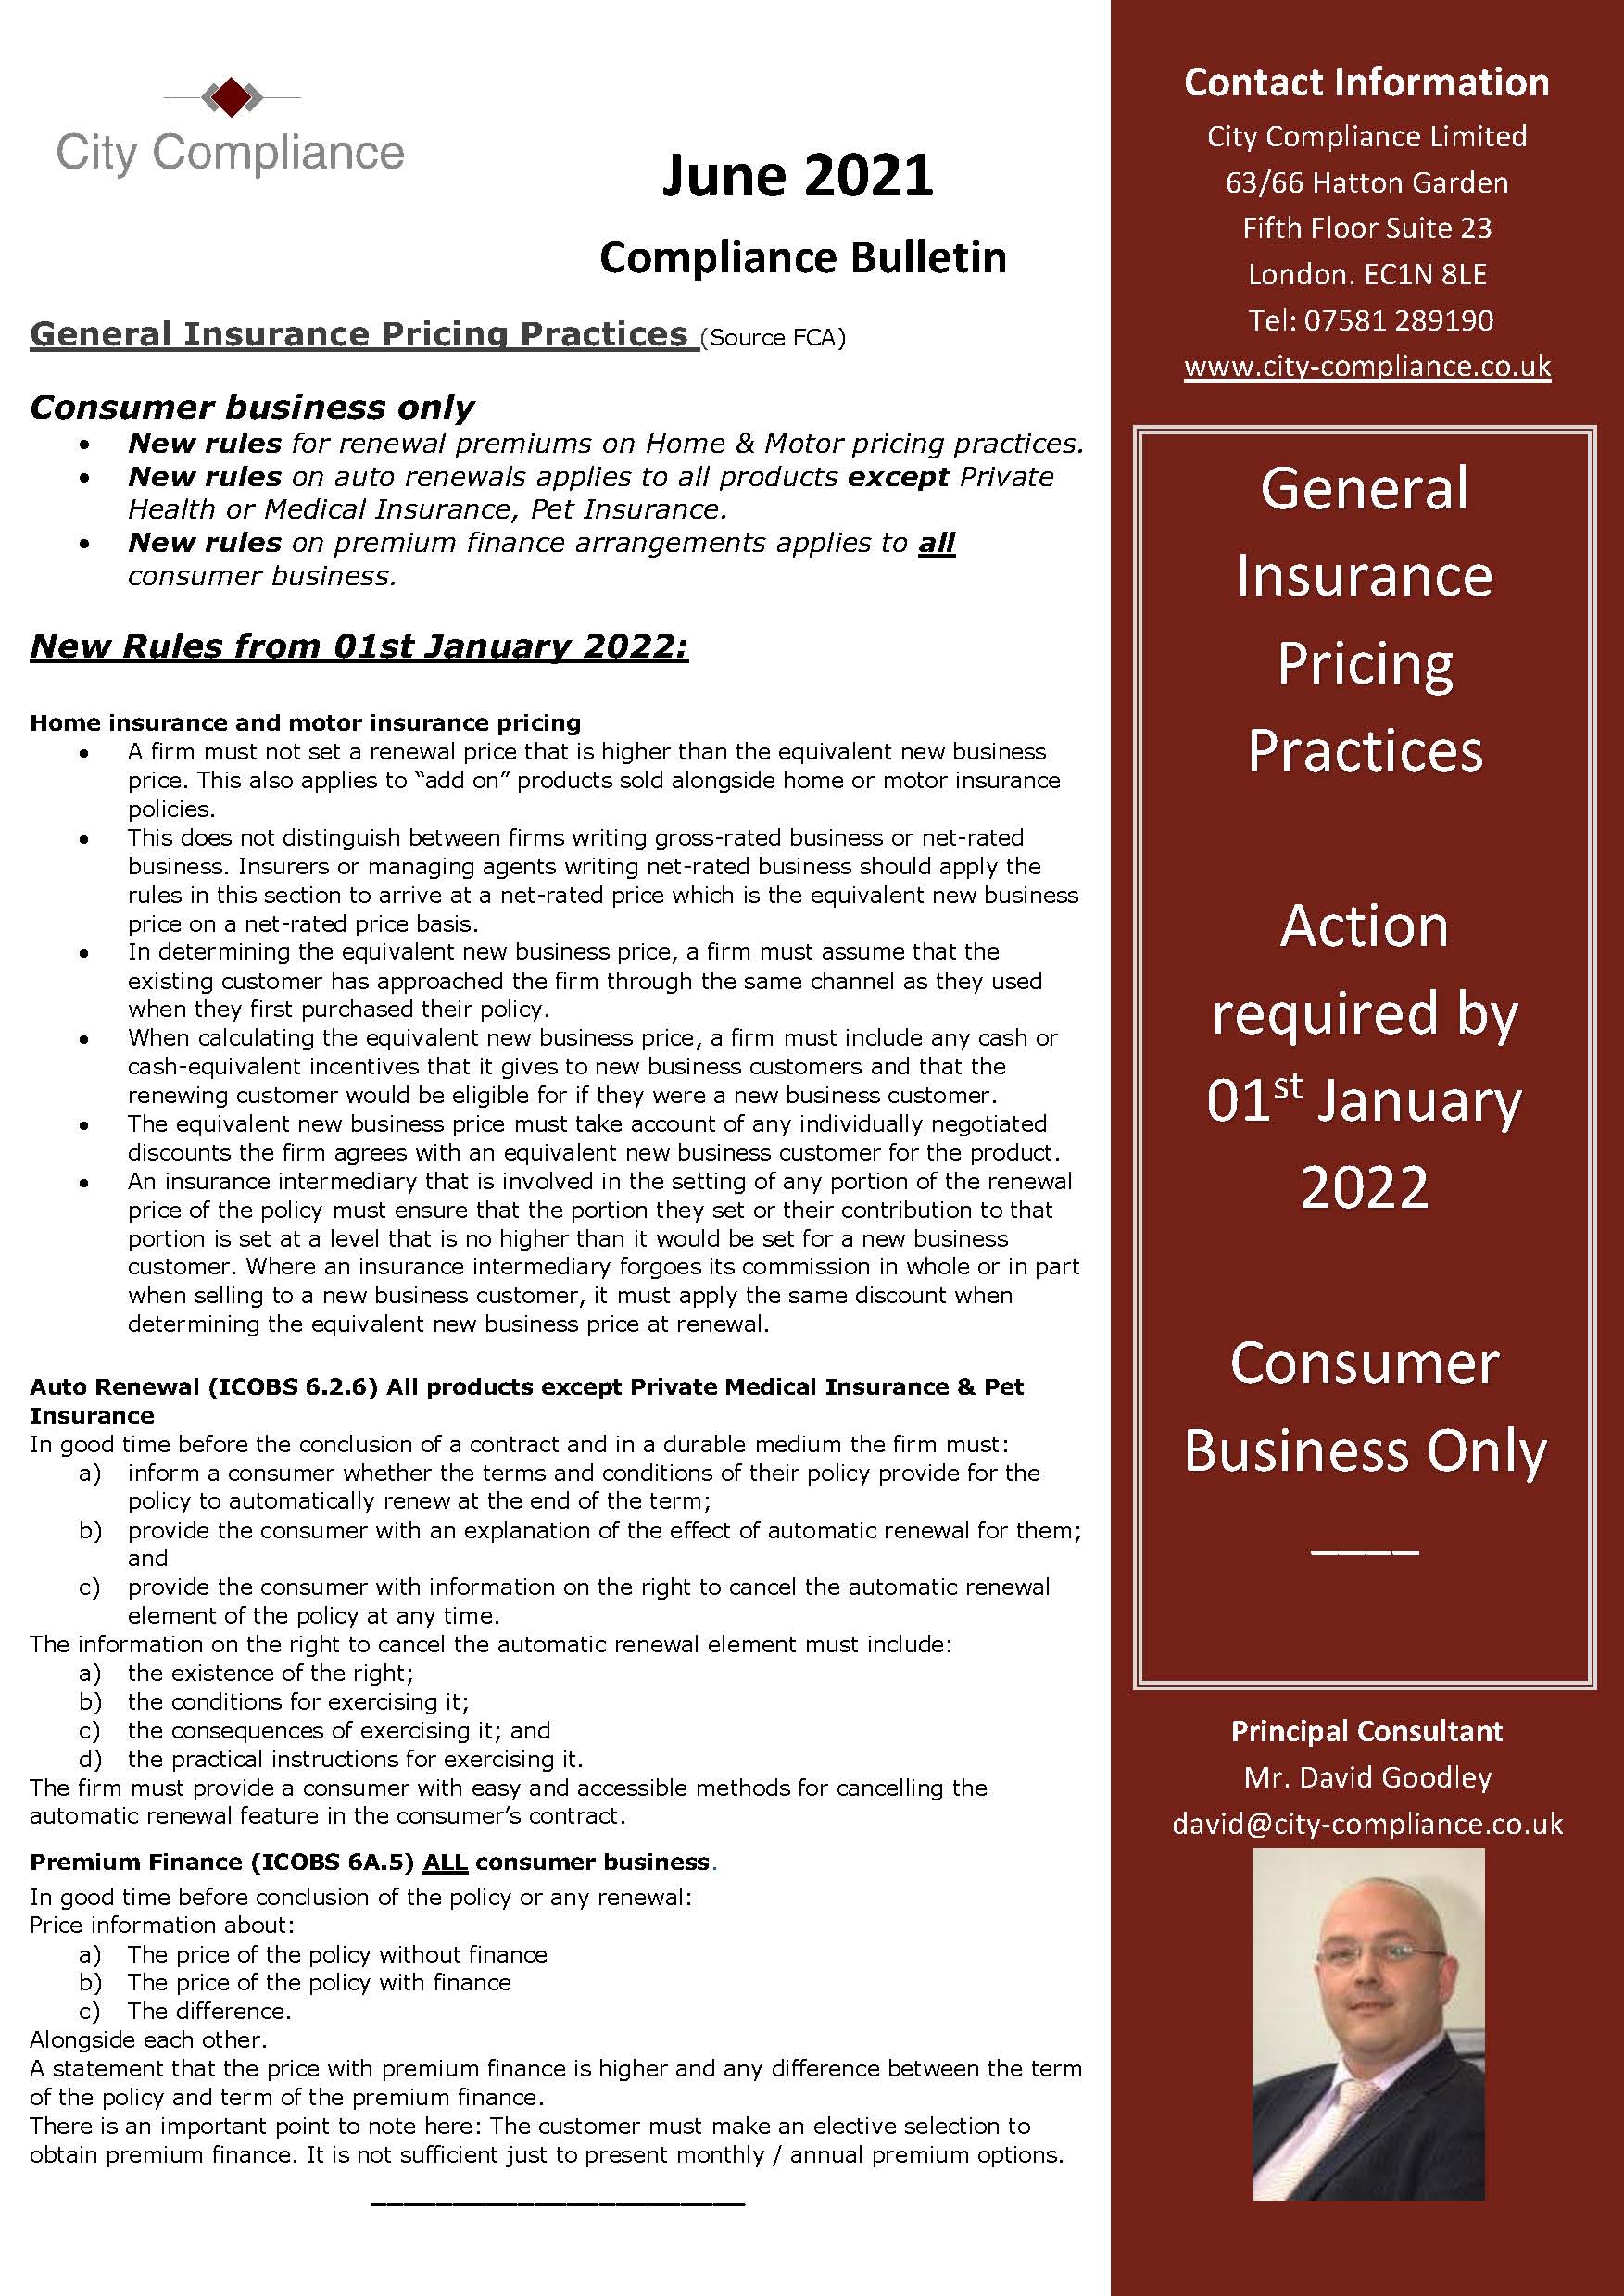 June 2021 General Insurance Pricing Practices Bulletin Final